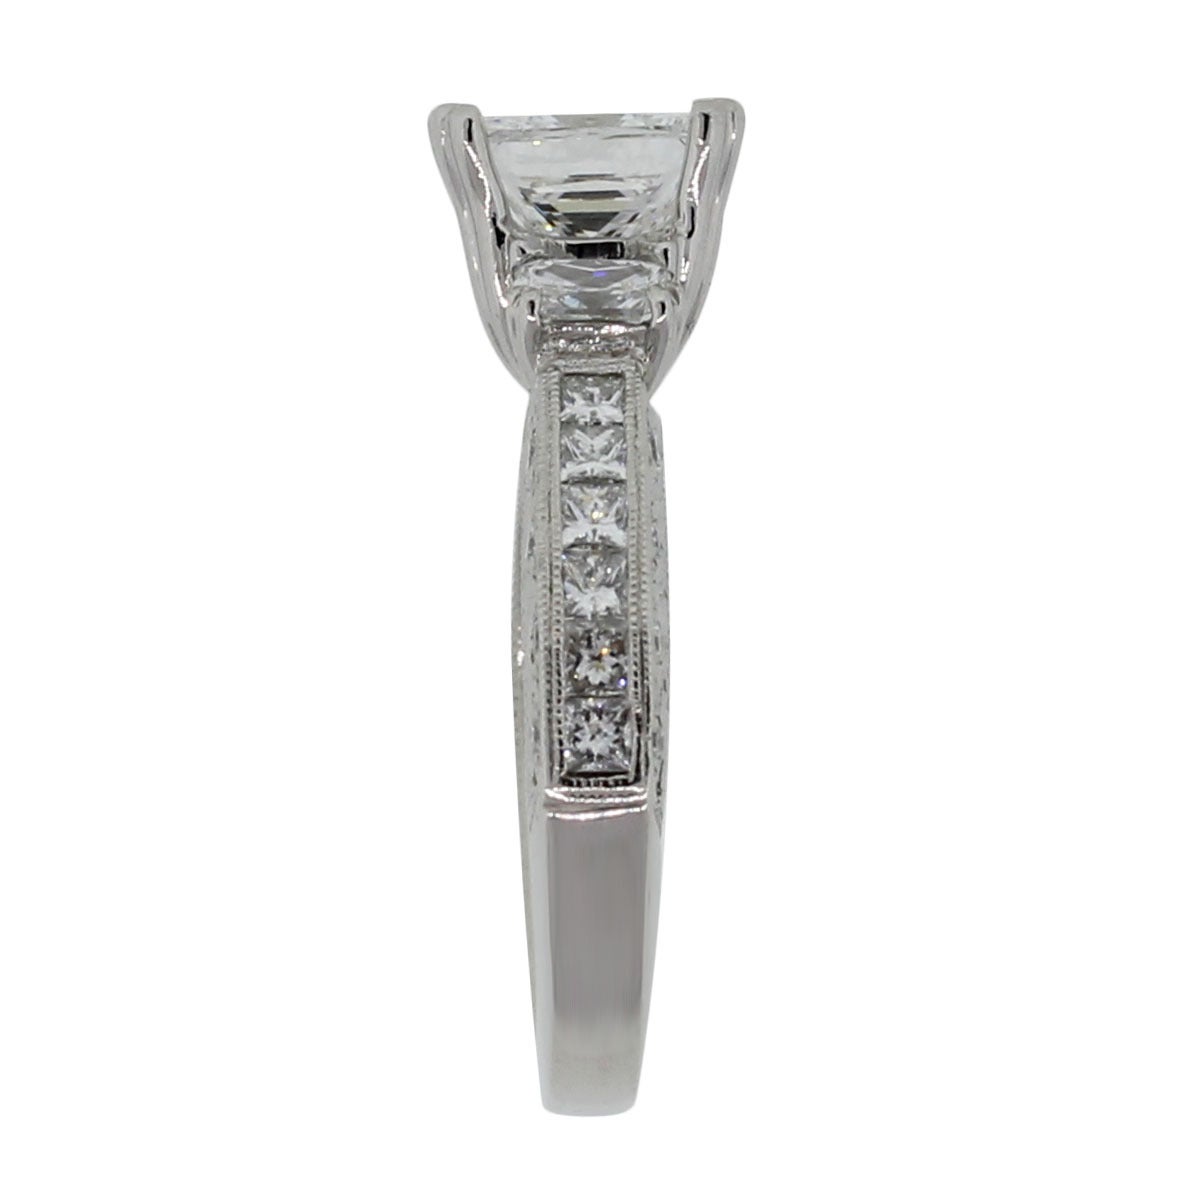 Tacori Platinum 1.71CT GIA Princess Cut Diamond Ring
Material: Platinum
Center Diamond Details: 1.71ct GIA Certified Princess Cut Diamond. F in color and VS2 in clarity
Mounting Diamond Details: Approximately 1.20ctw of Cresent and Radiant shape